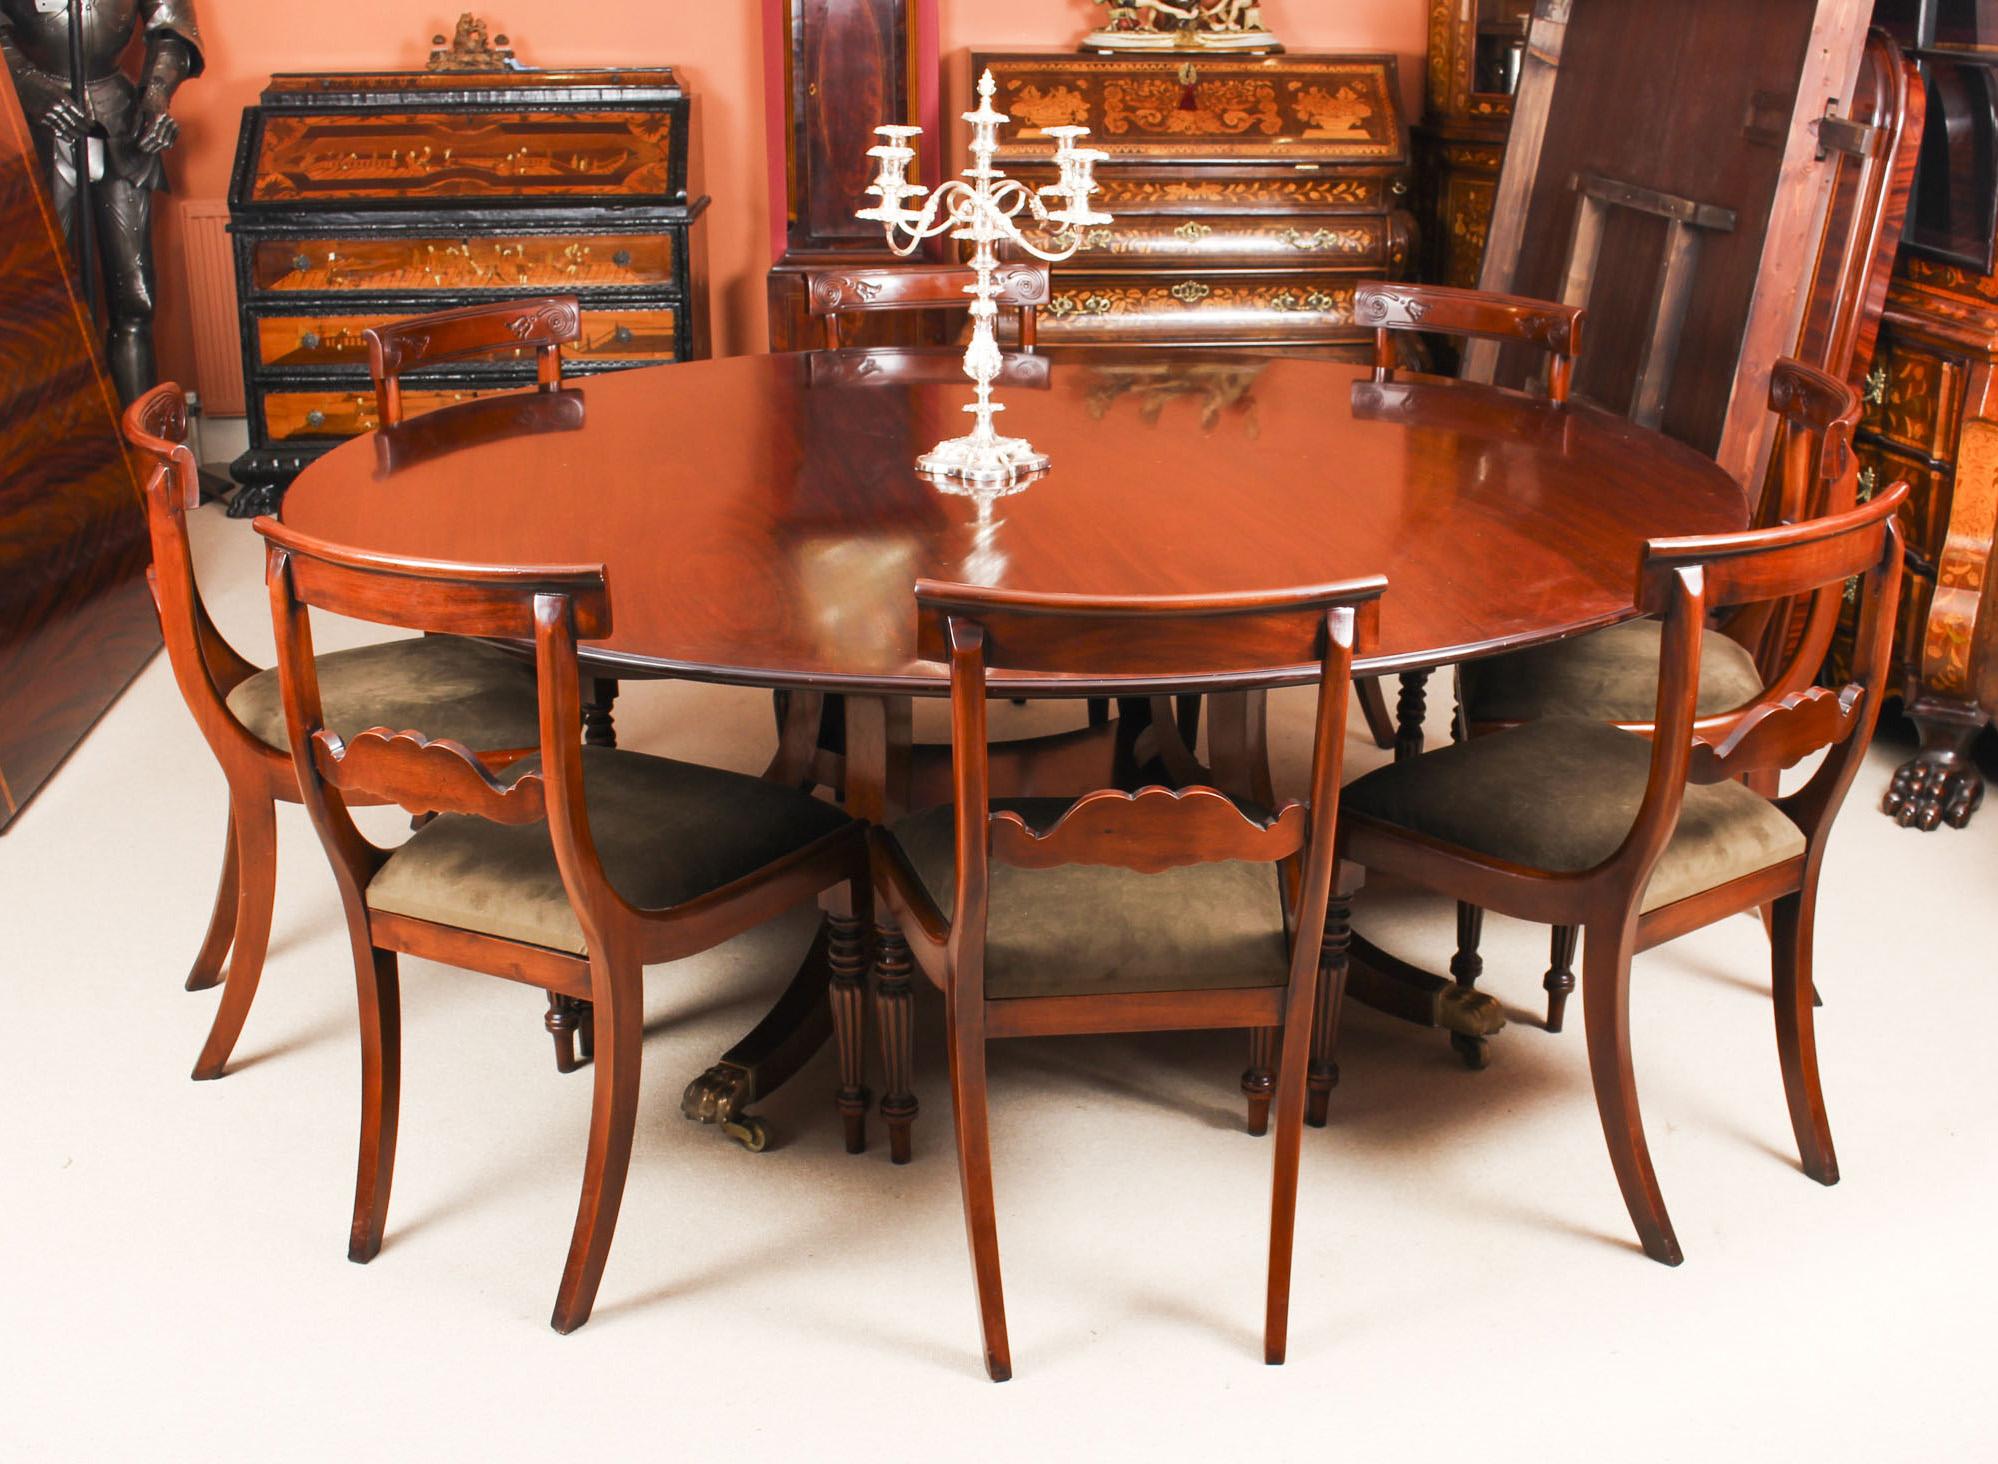 This is a beautiful dining set comprising a Regency Revival flame mahogany dining table made by the Master Cabinet maker William Tillman and bearing his label on the underside, circa 1970 in date with a set of eight vintage dining chairs.

The